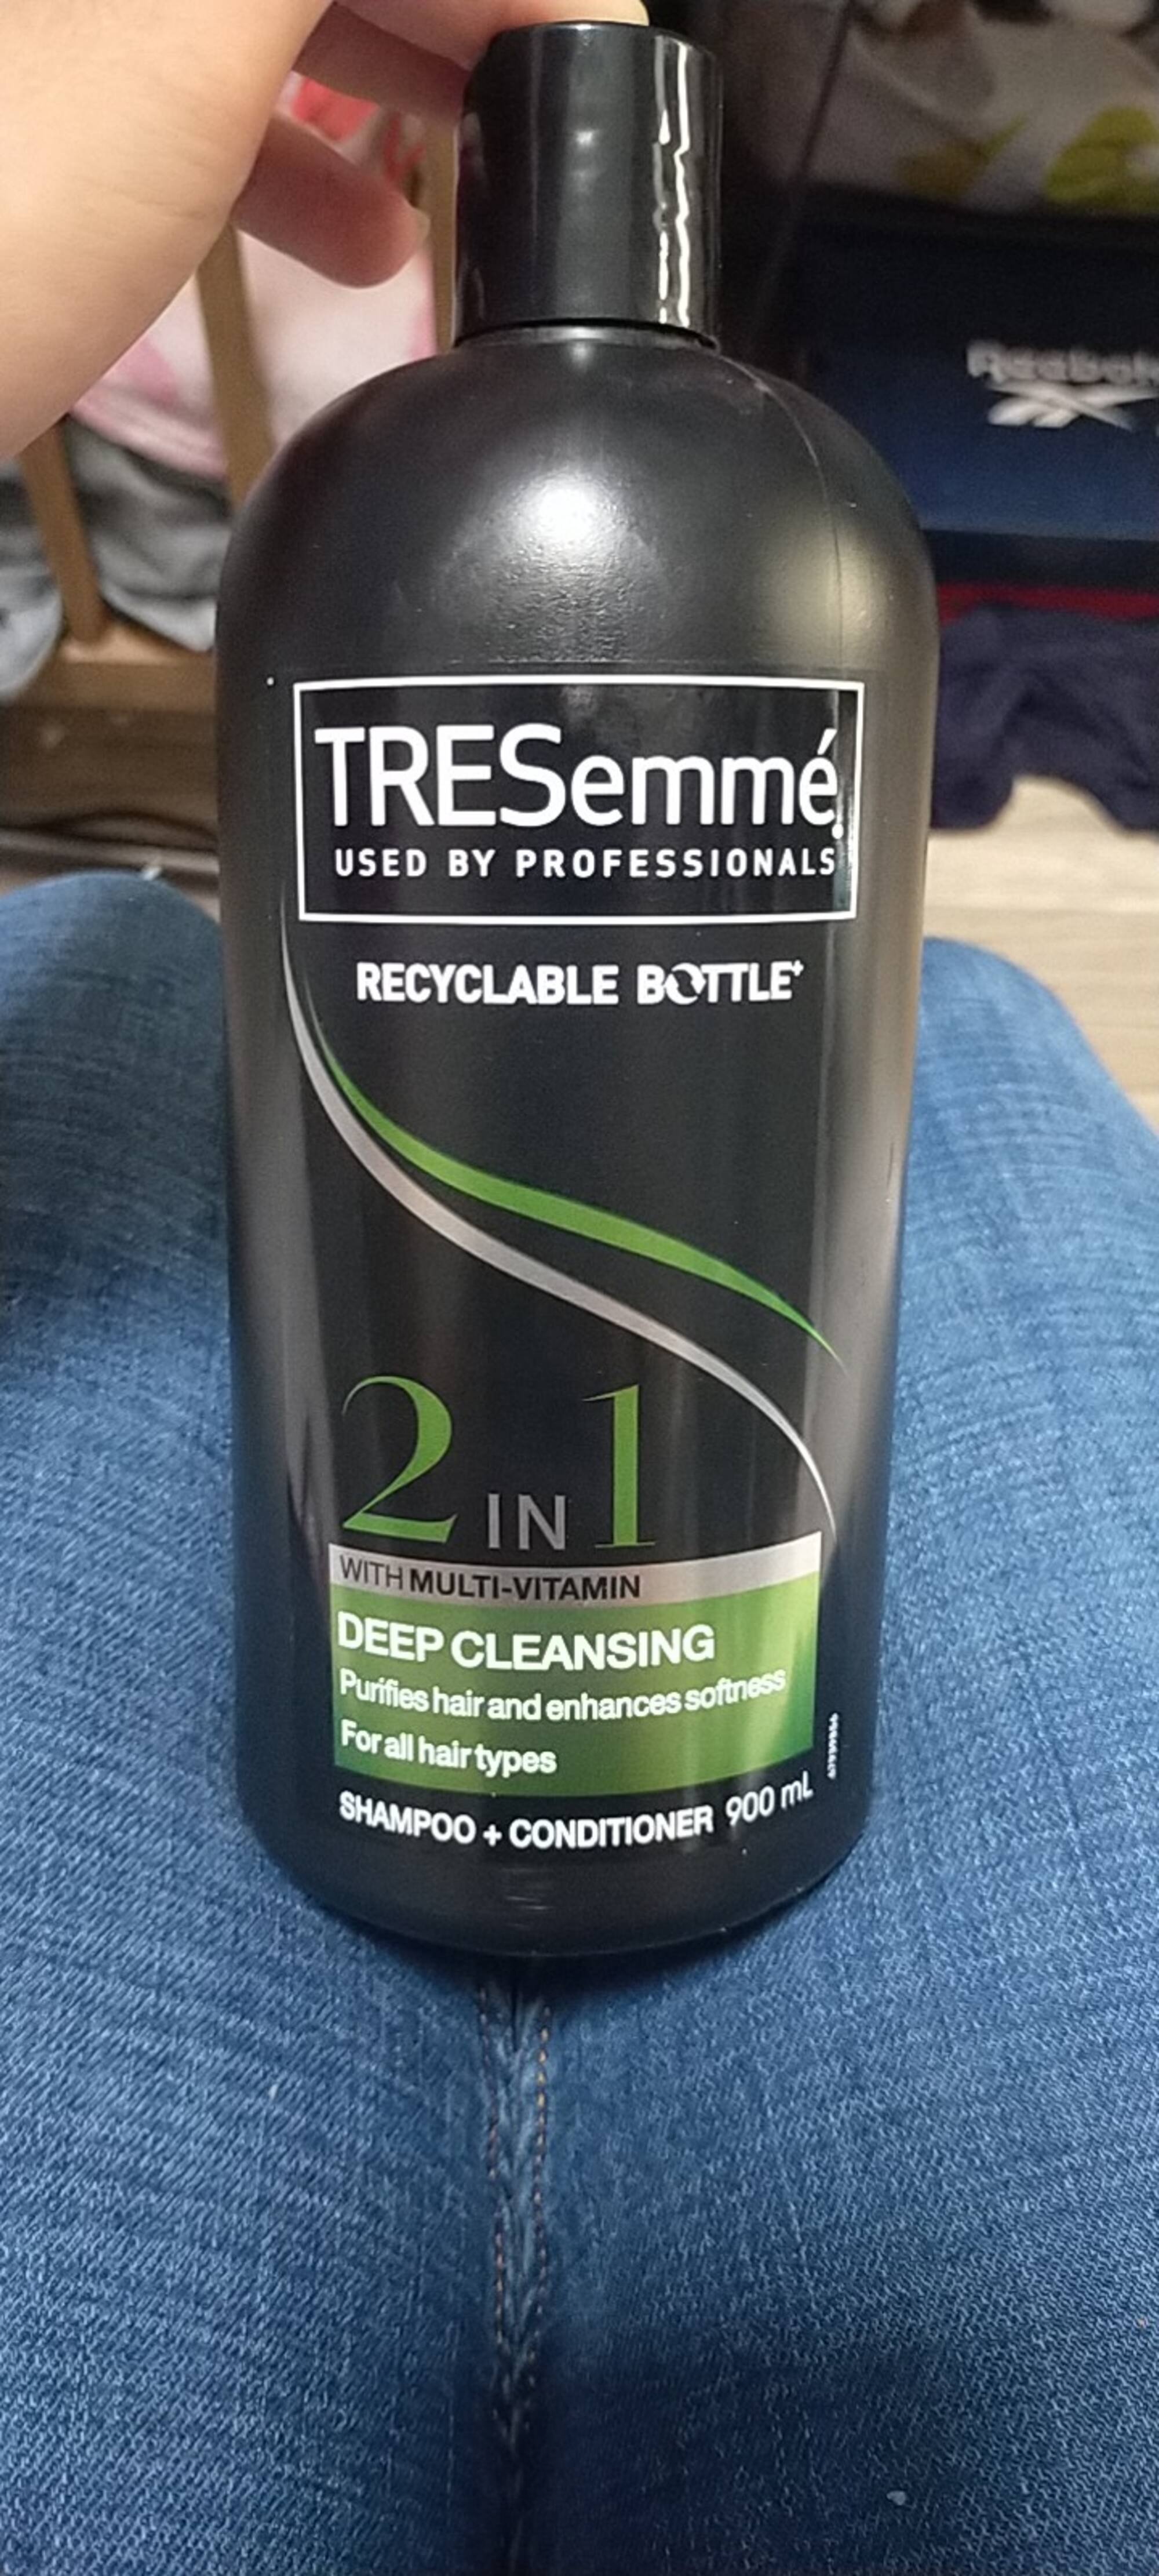 TRESEMMÉ - 2 in 1 Deep cleansing - Shampoo + conditioner